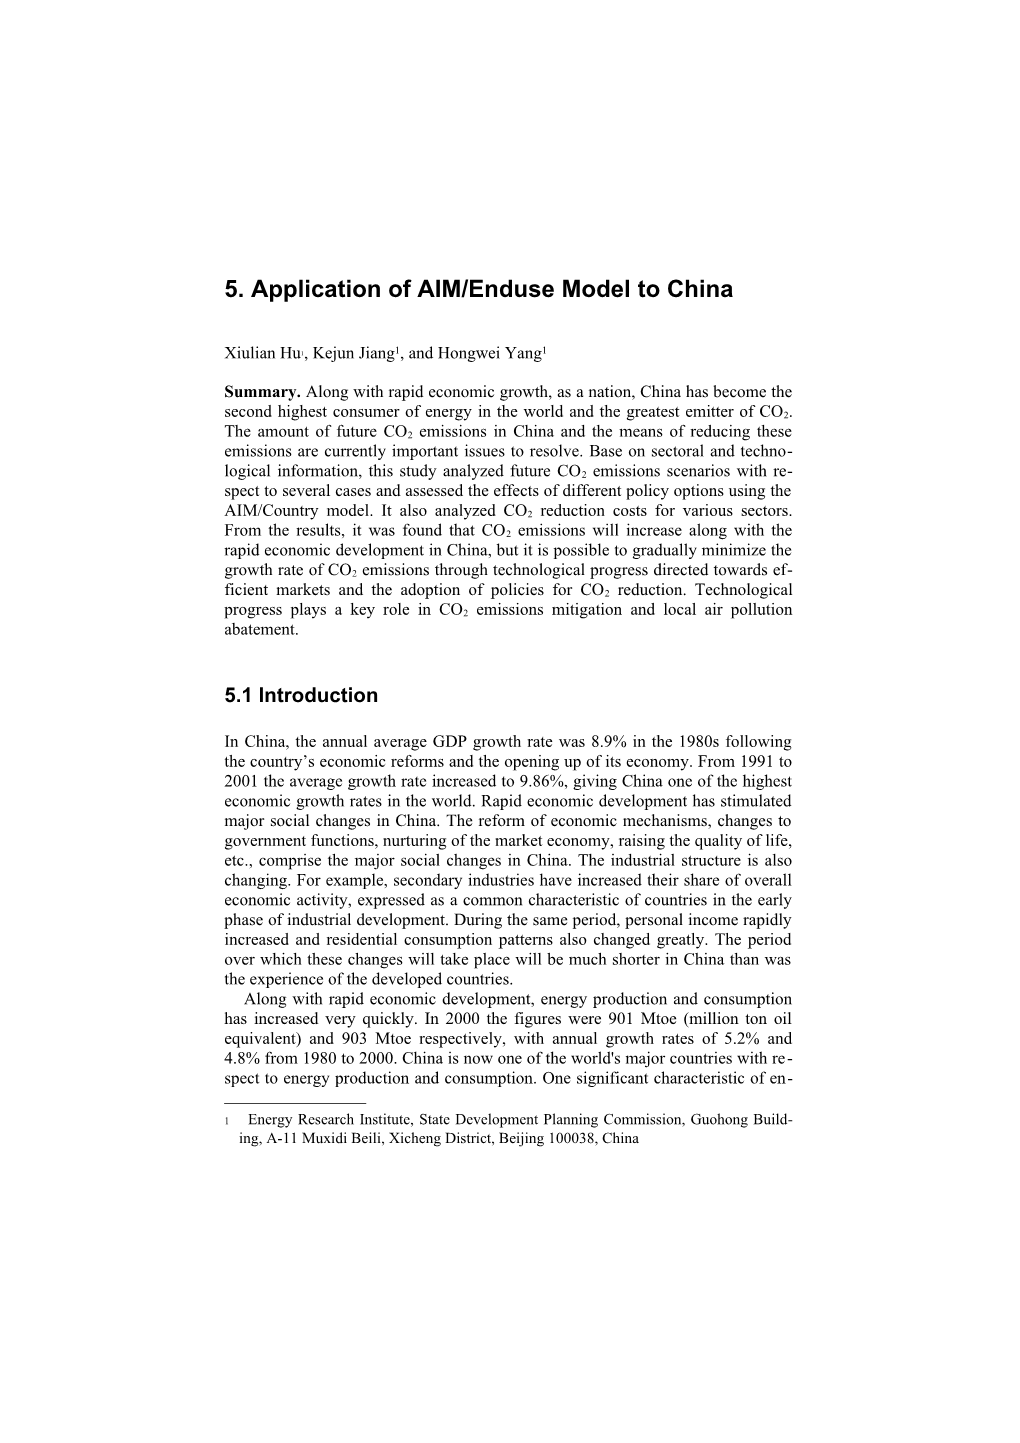 5. Application of AIM/Enduse Model to China